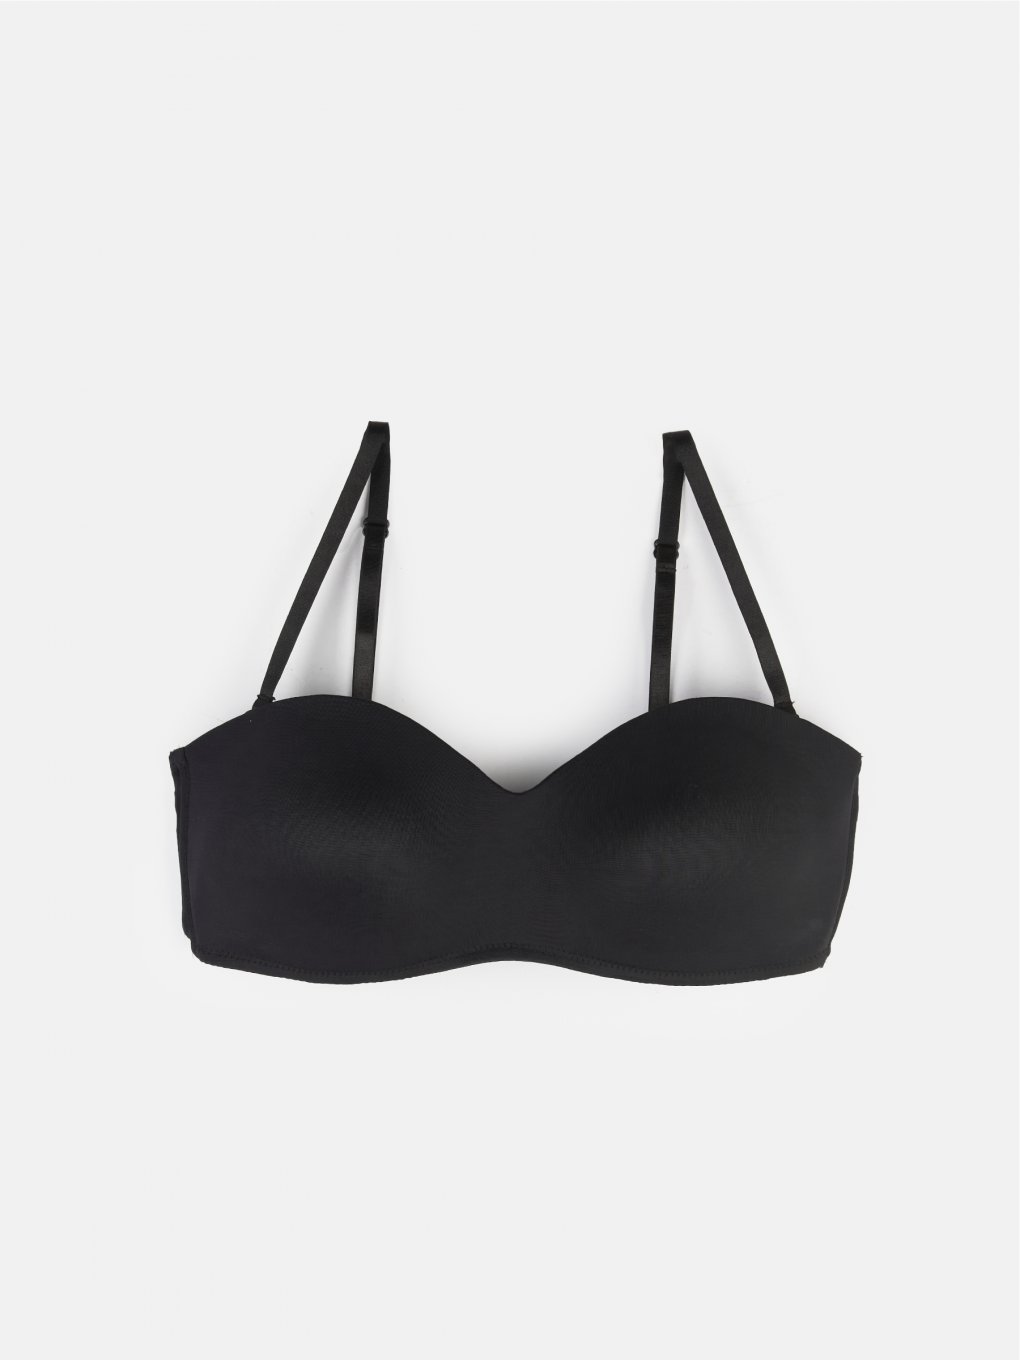 Padded bra with removable straps